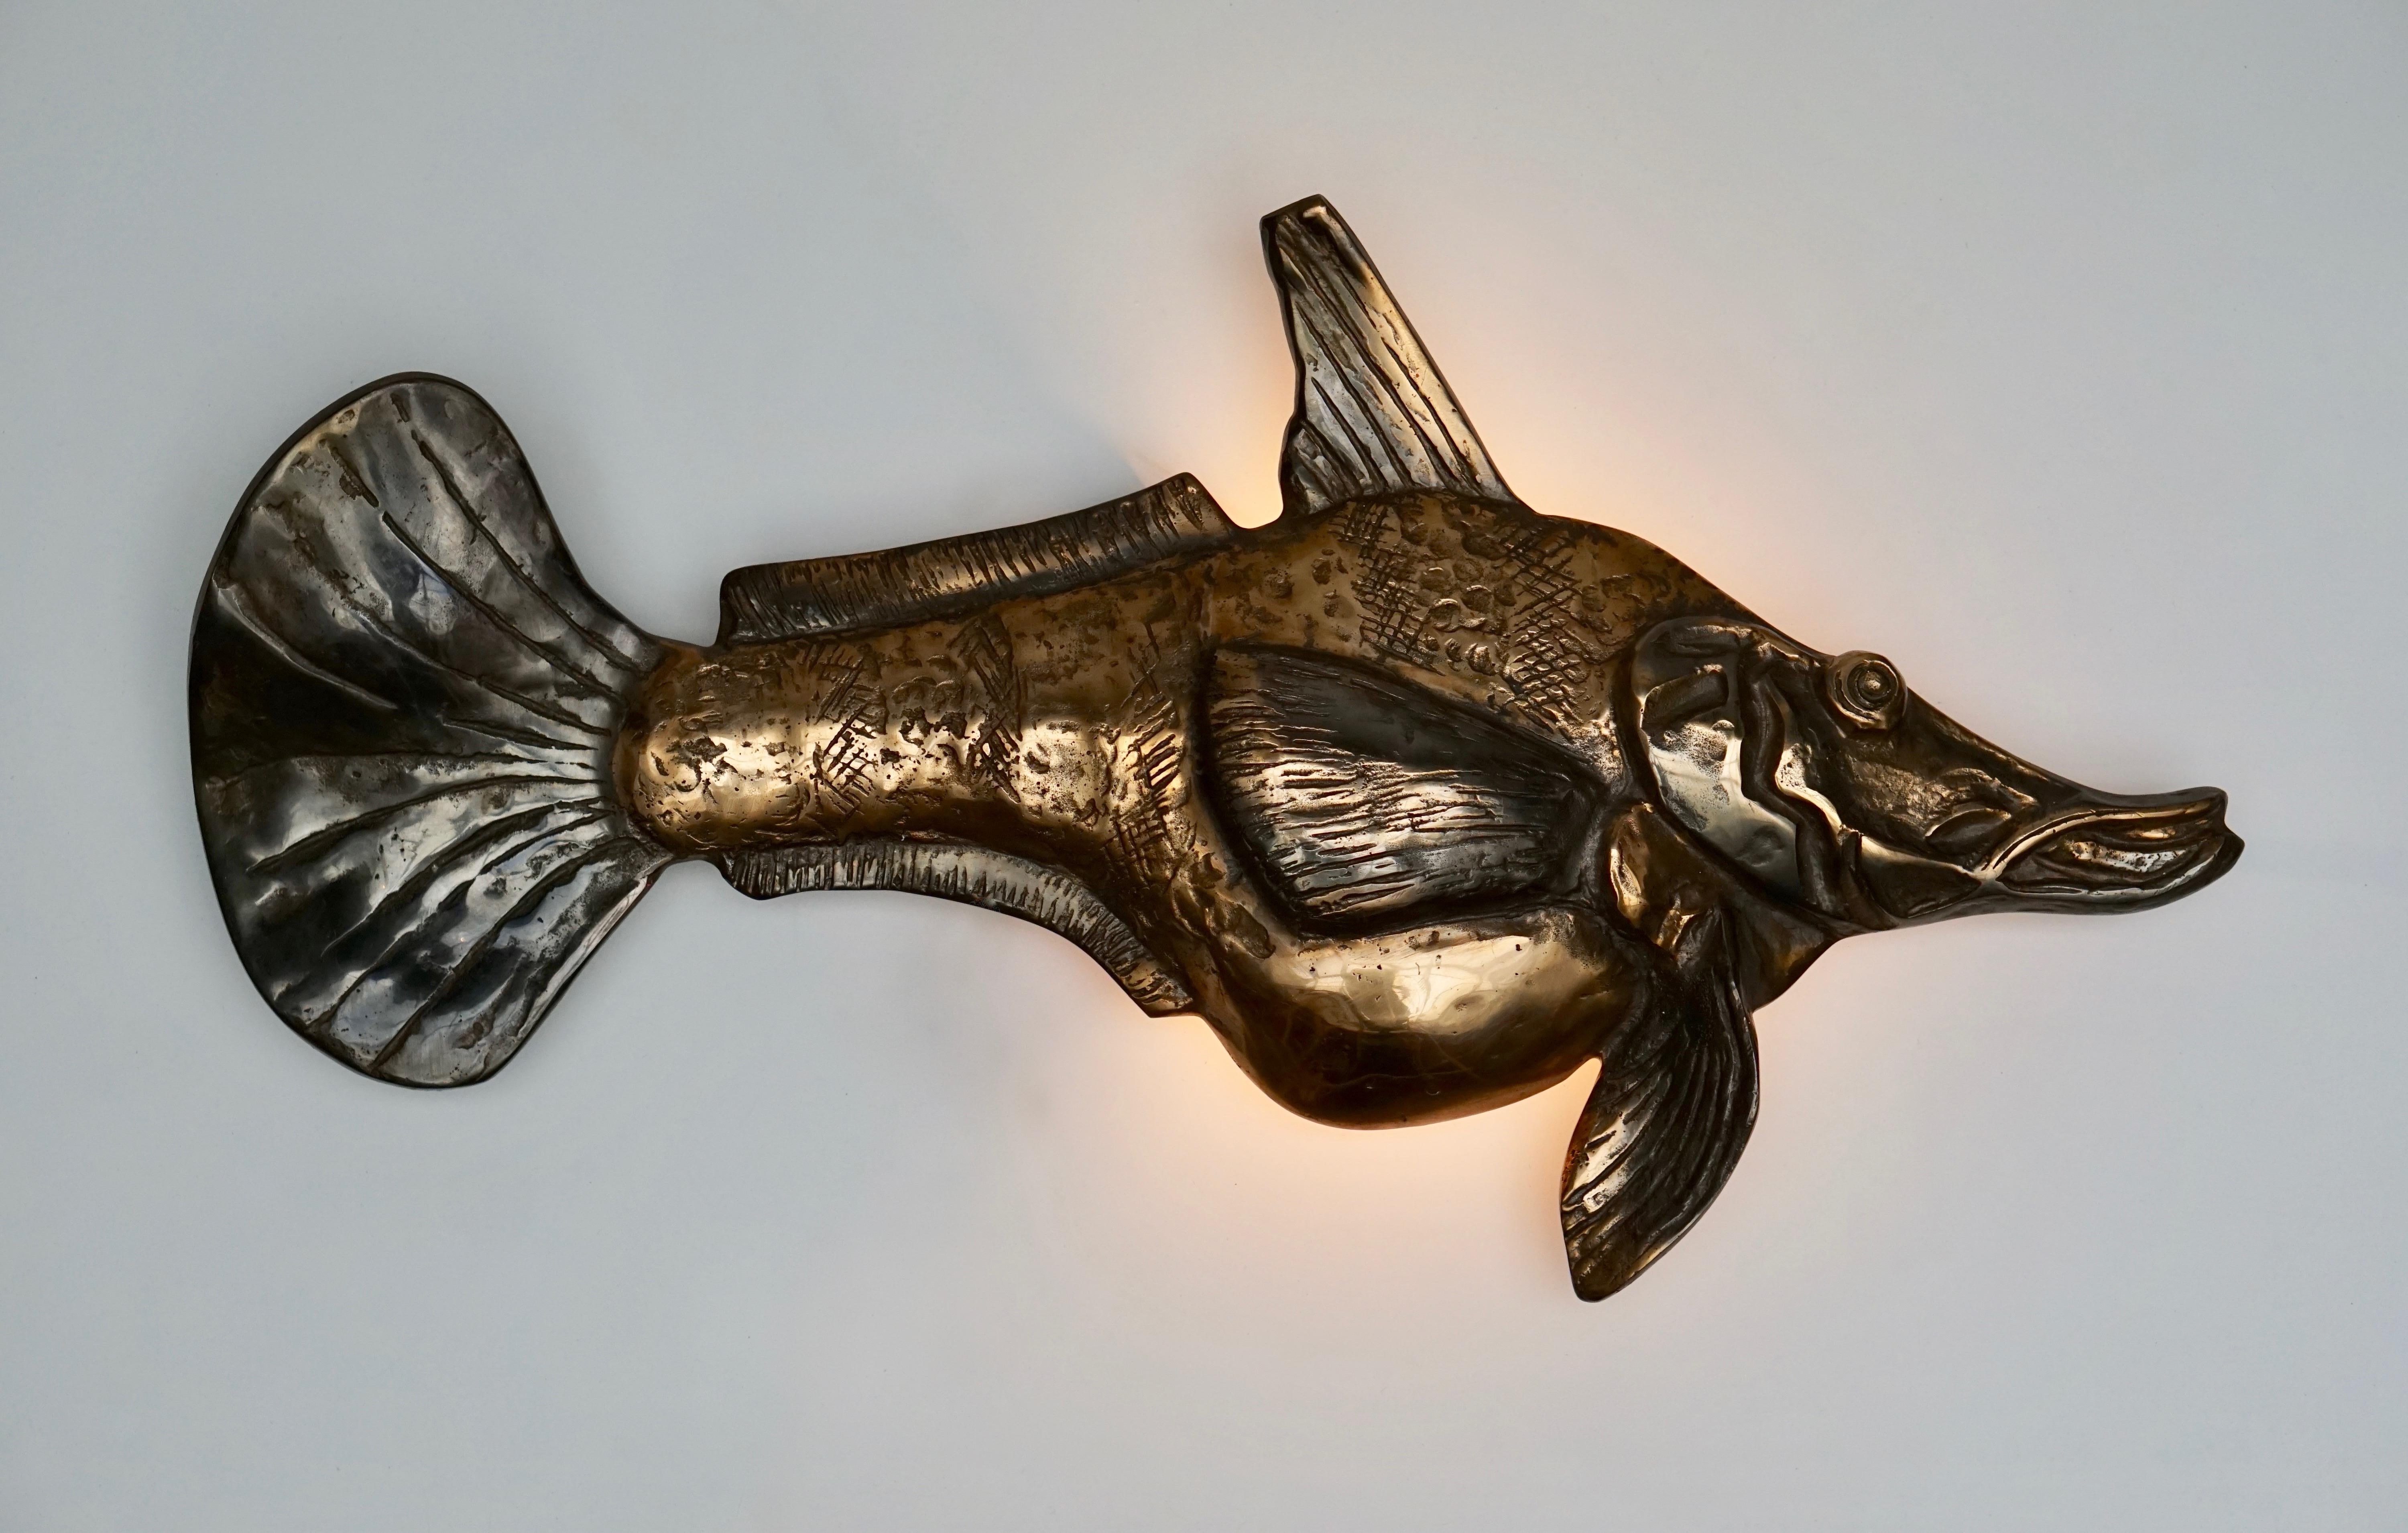 Bronze wall light sculpture in the shape of a fish.
Measures: Width 70 cm, height 38 cm, depth 10 cm.
Weight 6 kg.
One E14 bulb.